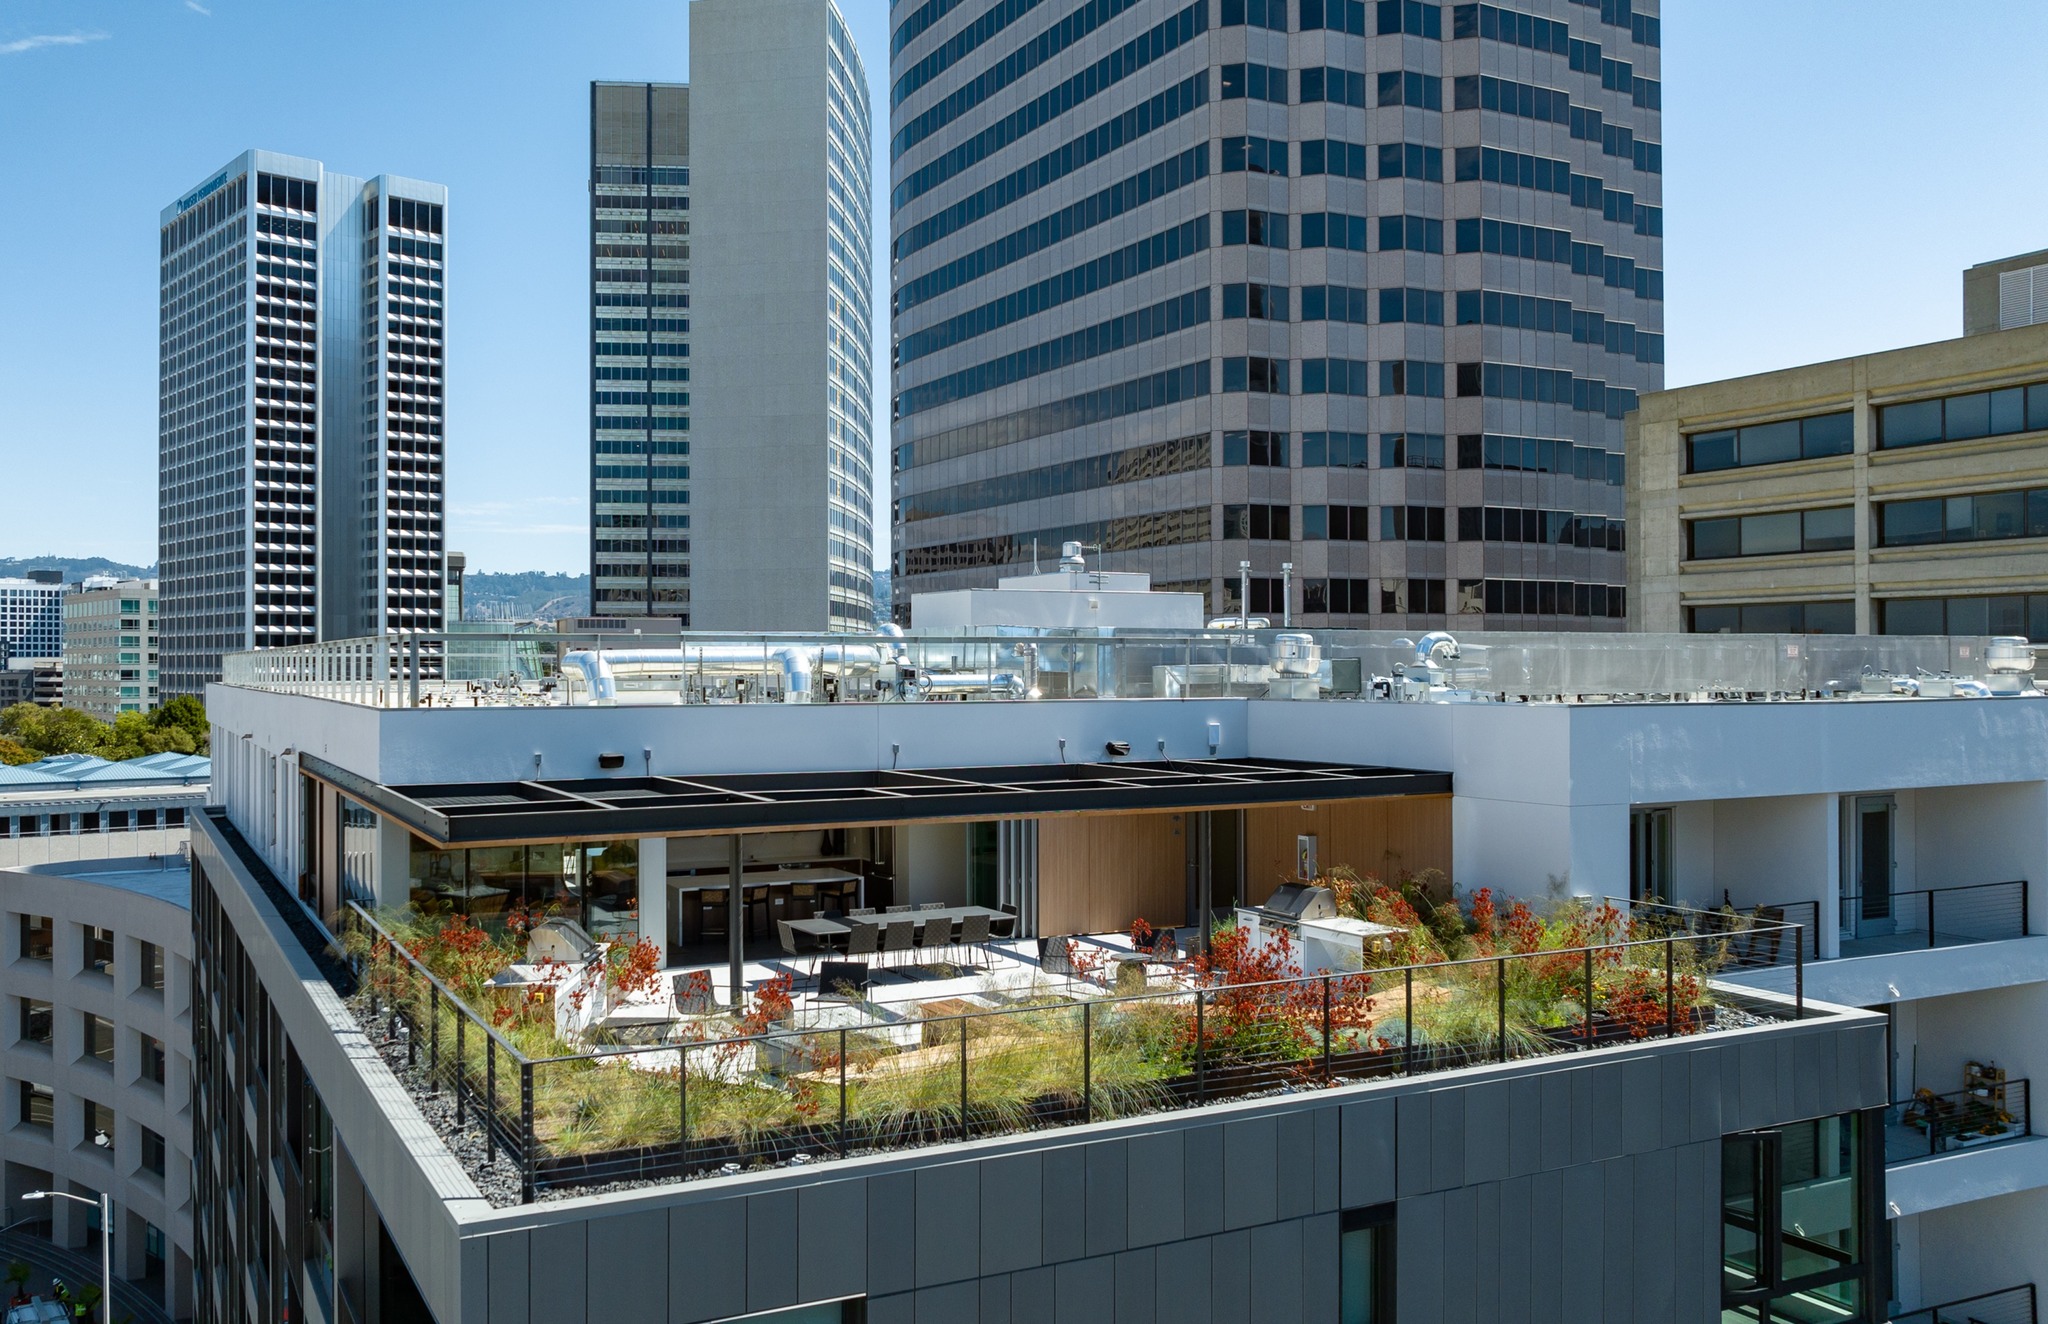 Stunning Rooftop Deck with Firepits, Grills + Sweeping Views Of Downtown Oakland